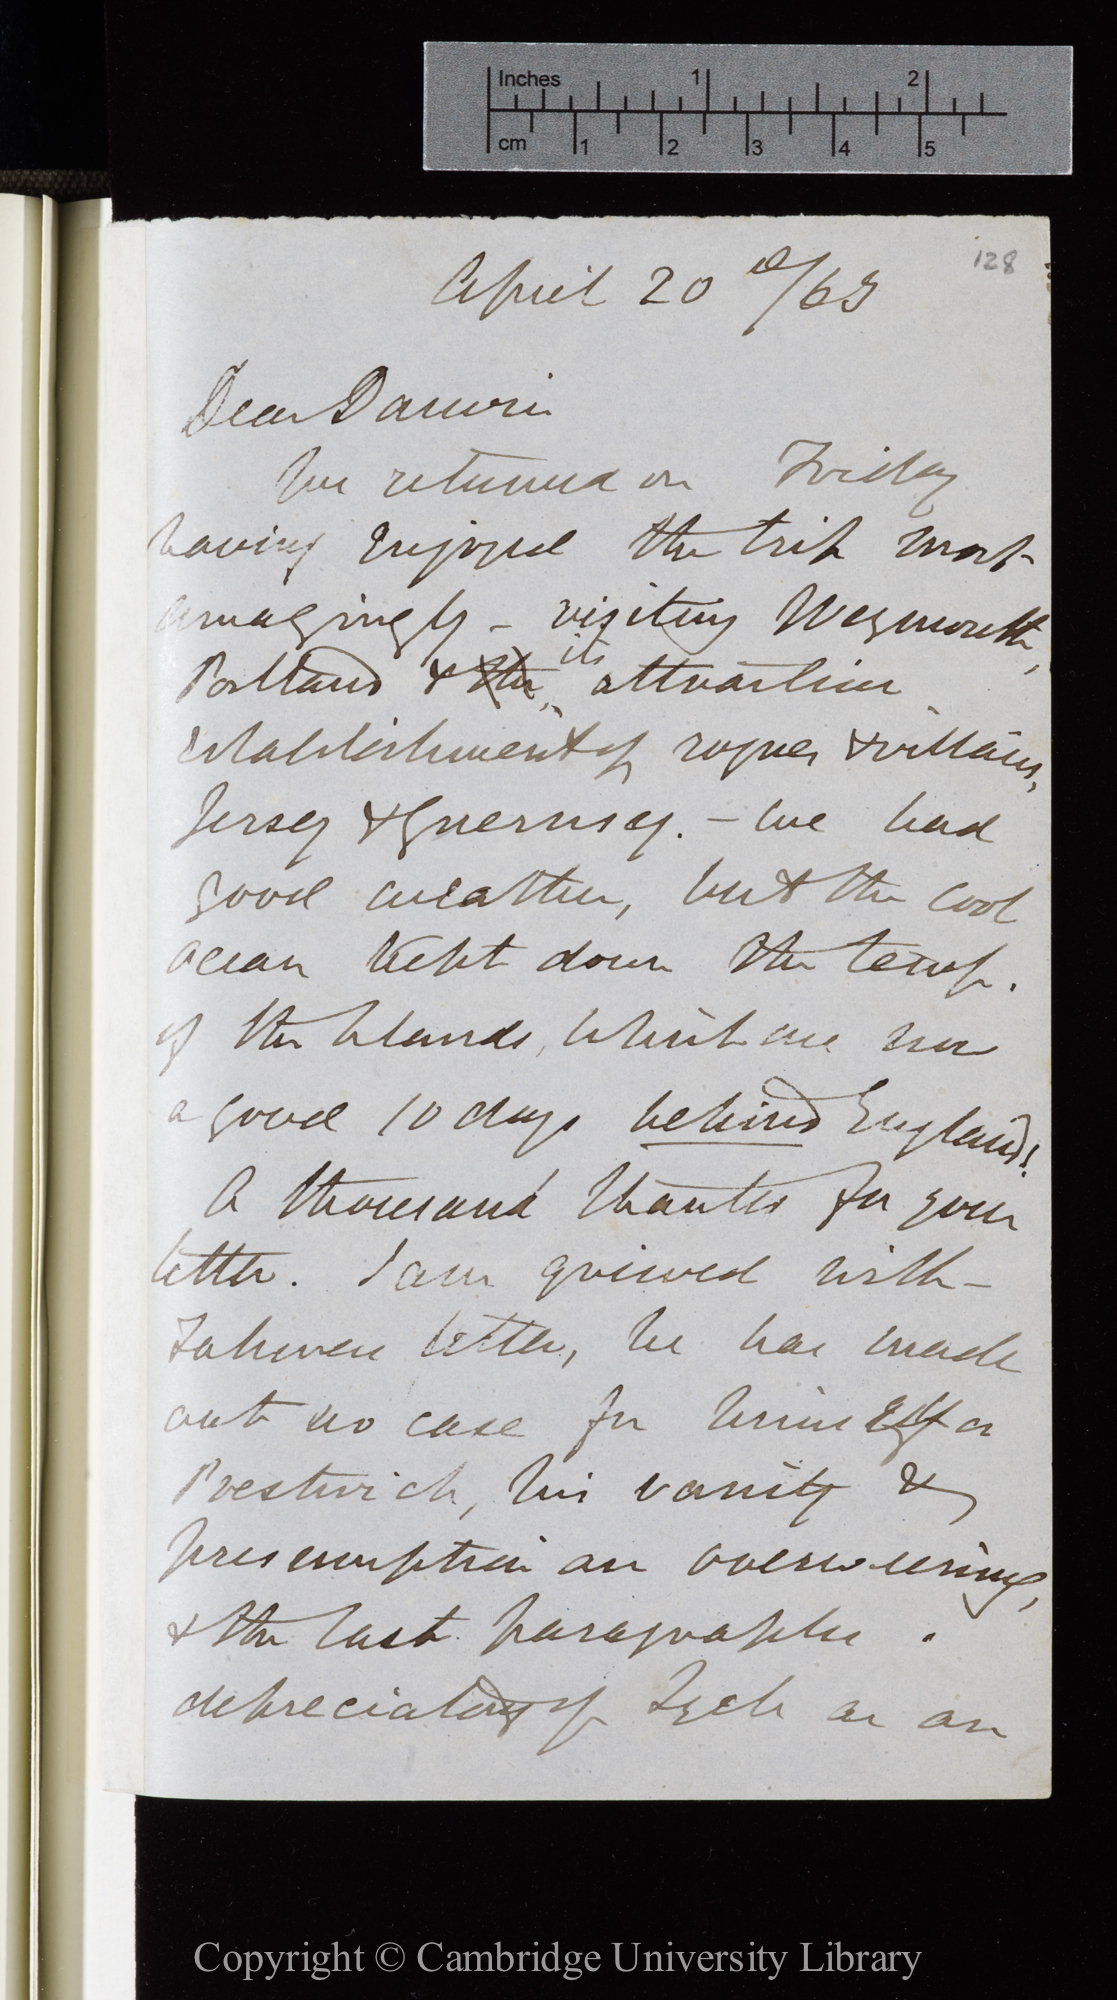 Letter from J. D. Hooker to C. R. Darwin   20 April 1863